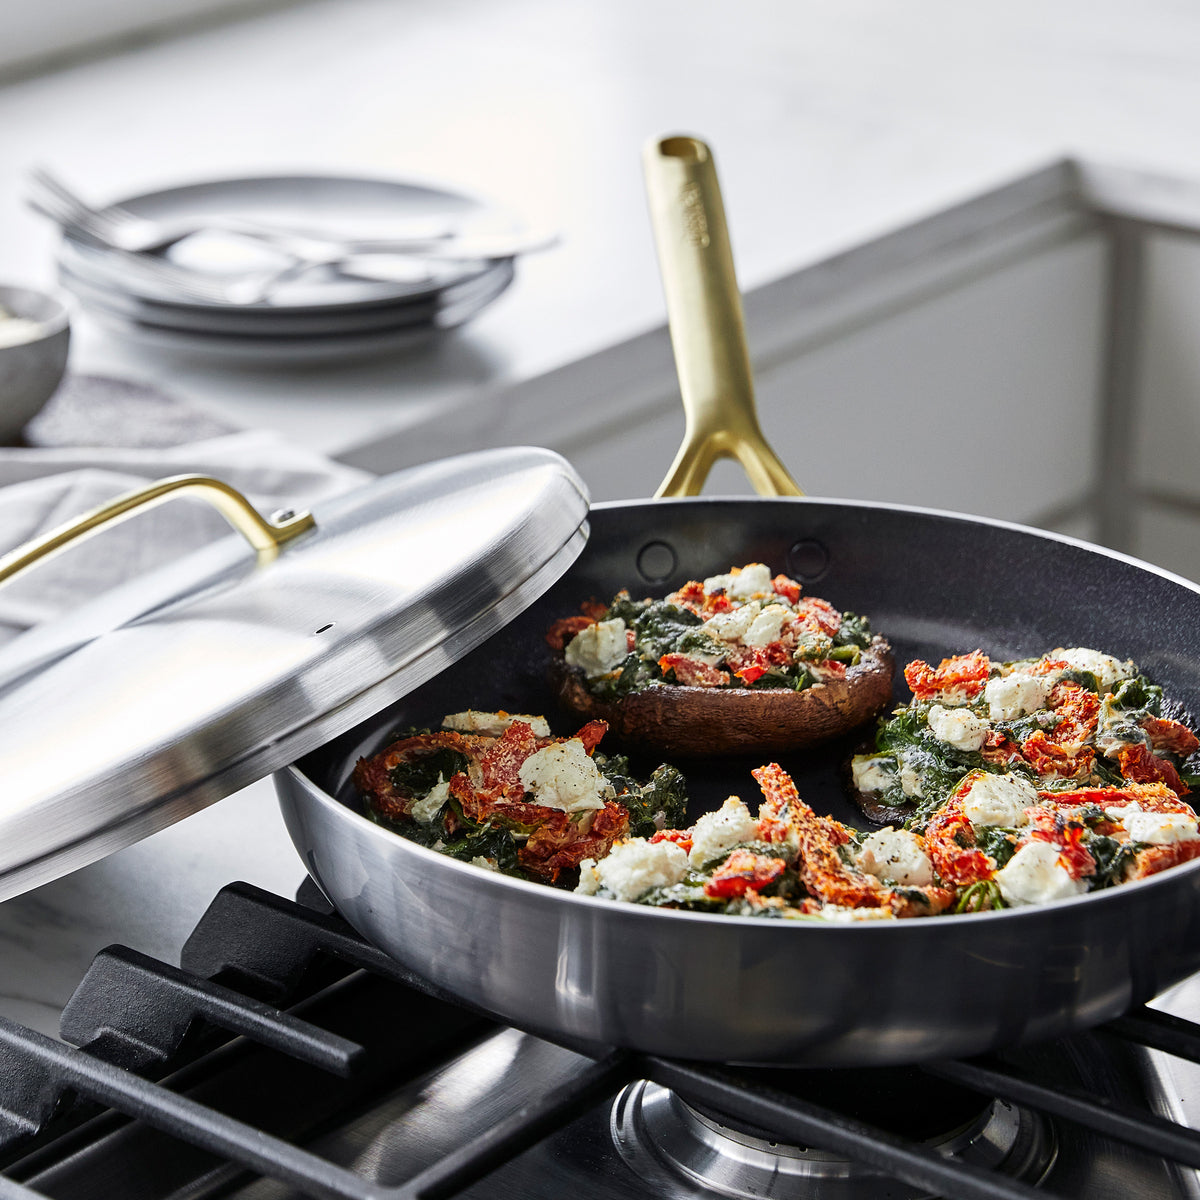 GreenPan Craft Steel Nonstick Skillet with Lid, 12, Silver